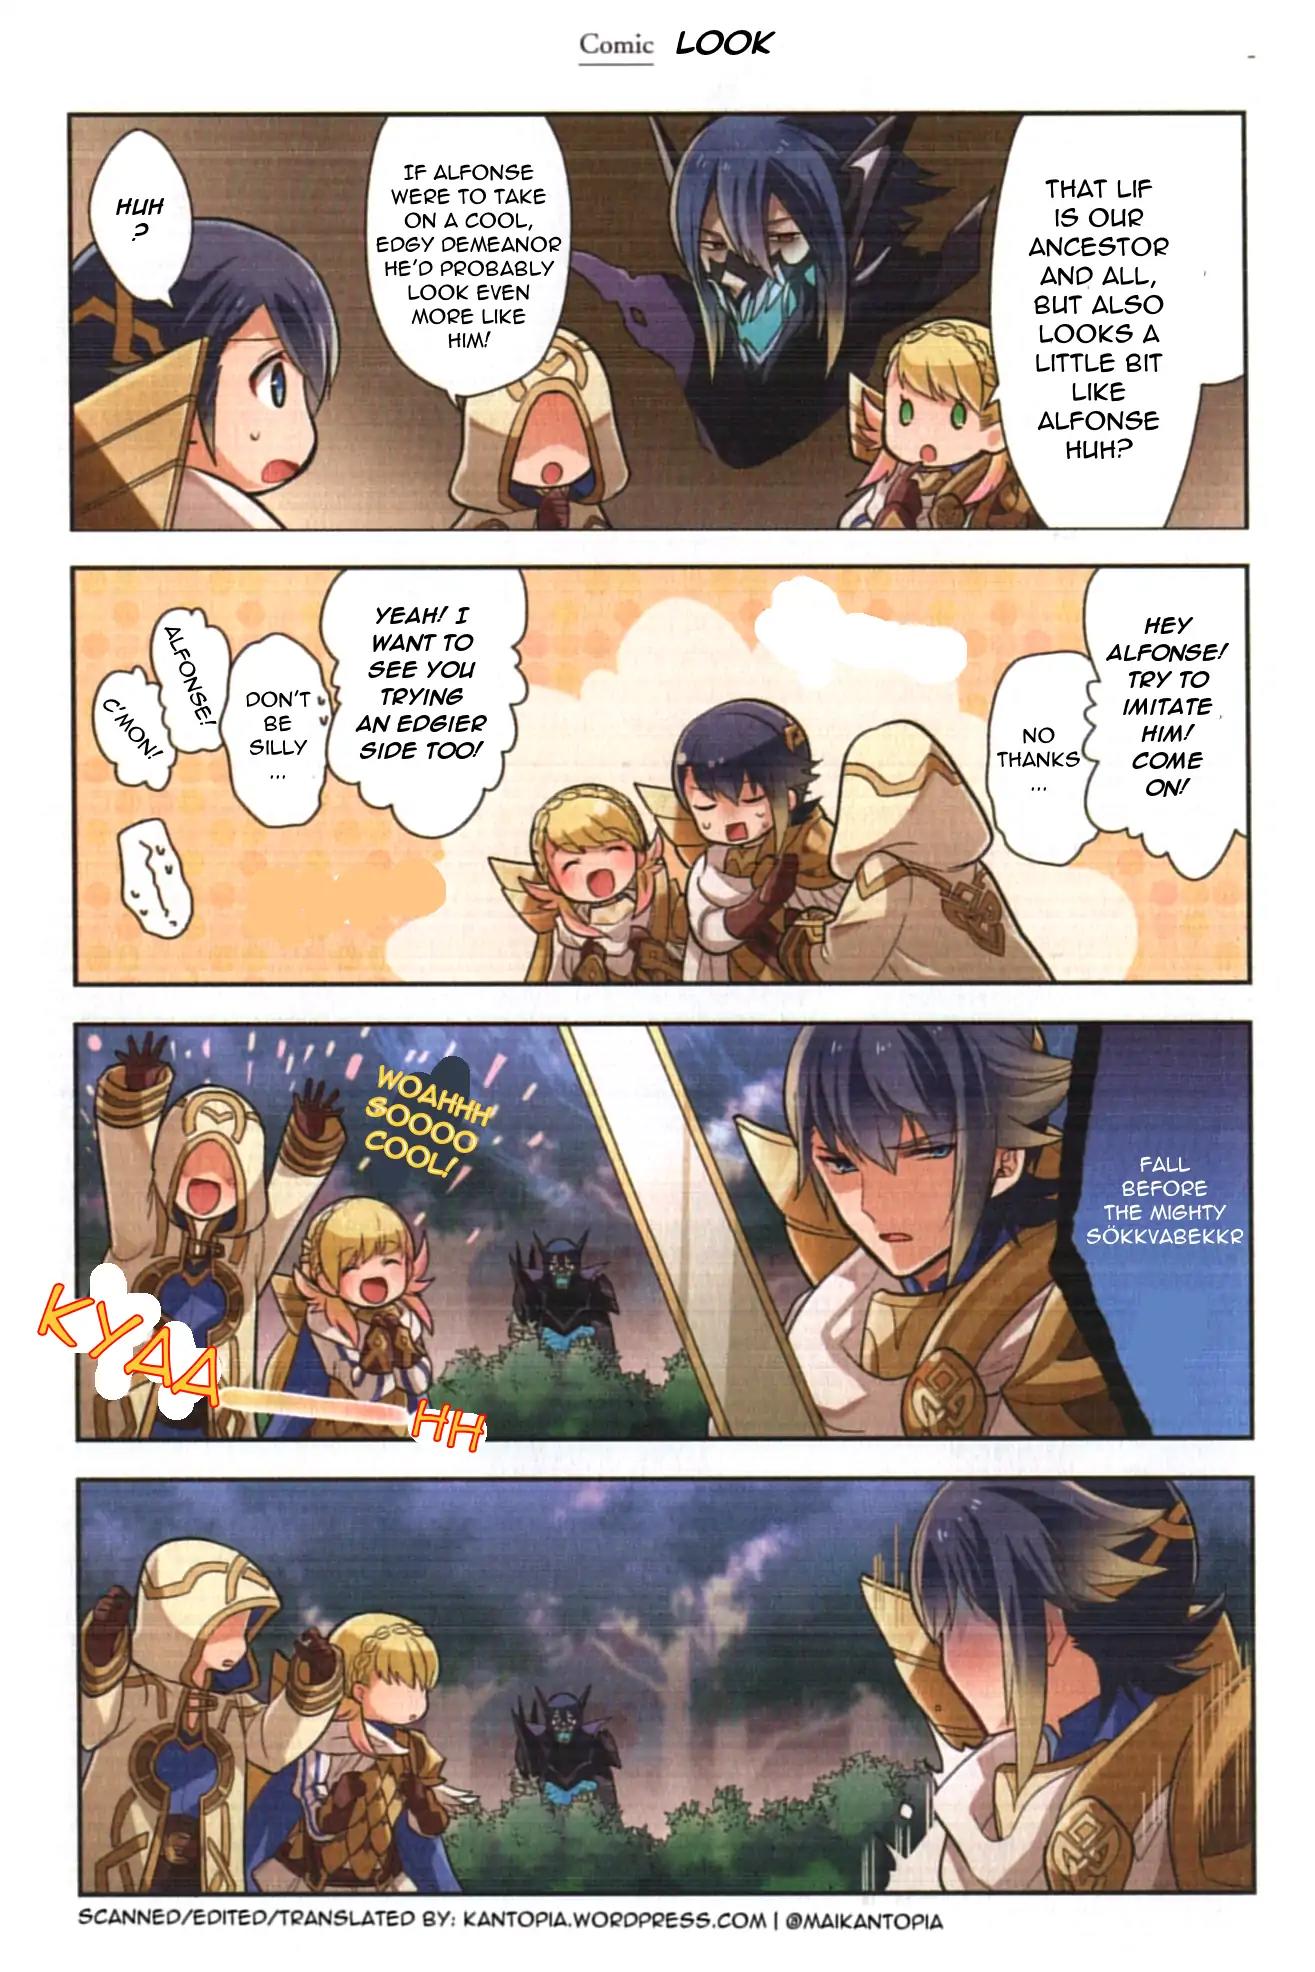 Fire Emblem Heroes Daily Lives of the Heroes Vol.1 Chapter 0.19: Character comic: